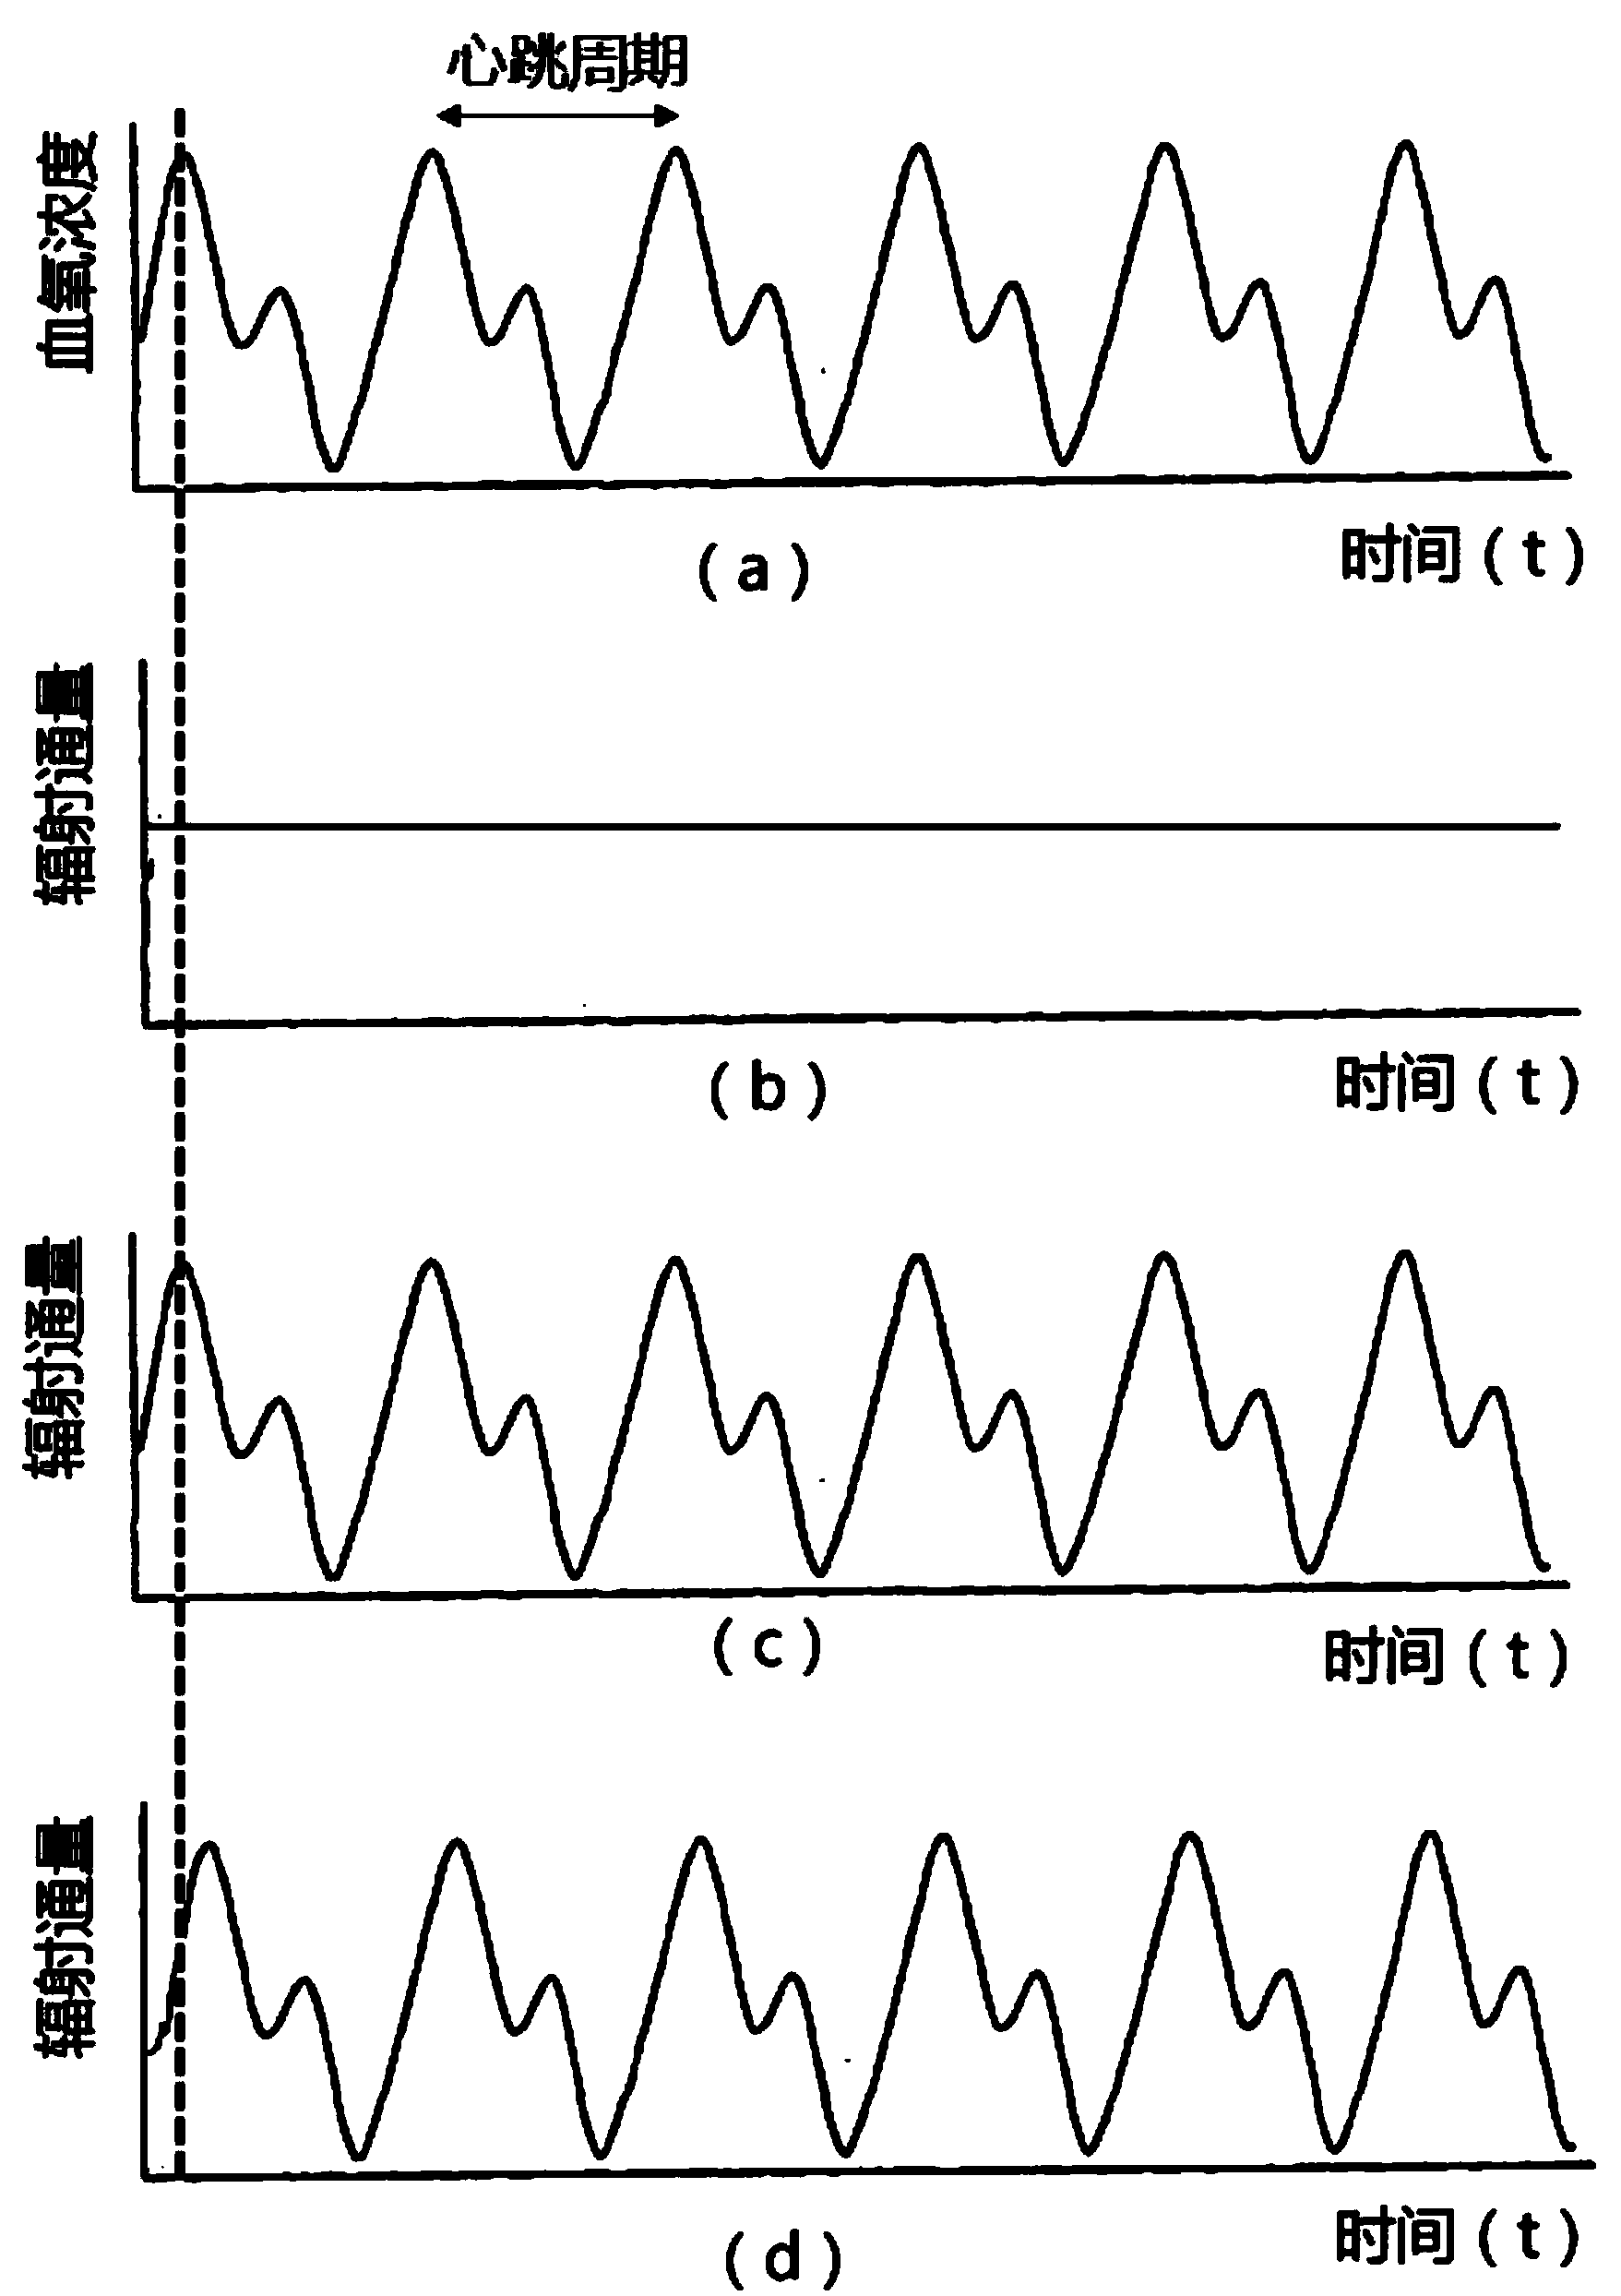 Synchronous photodynamic therapy device